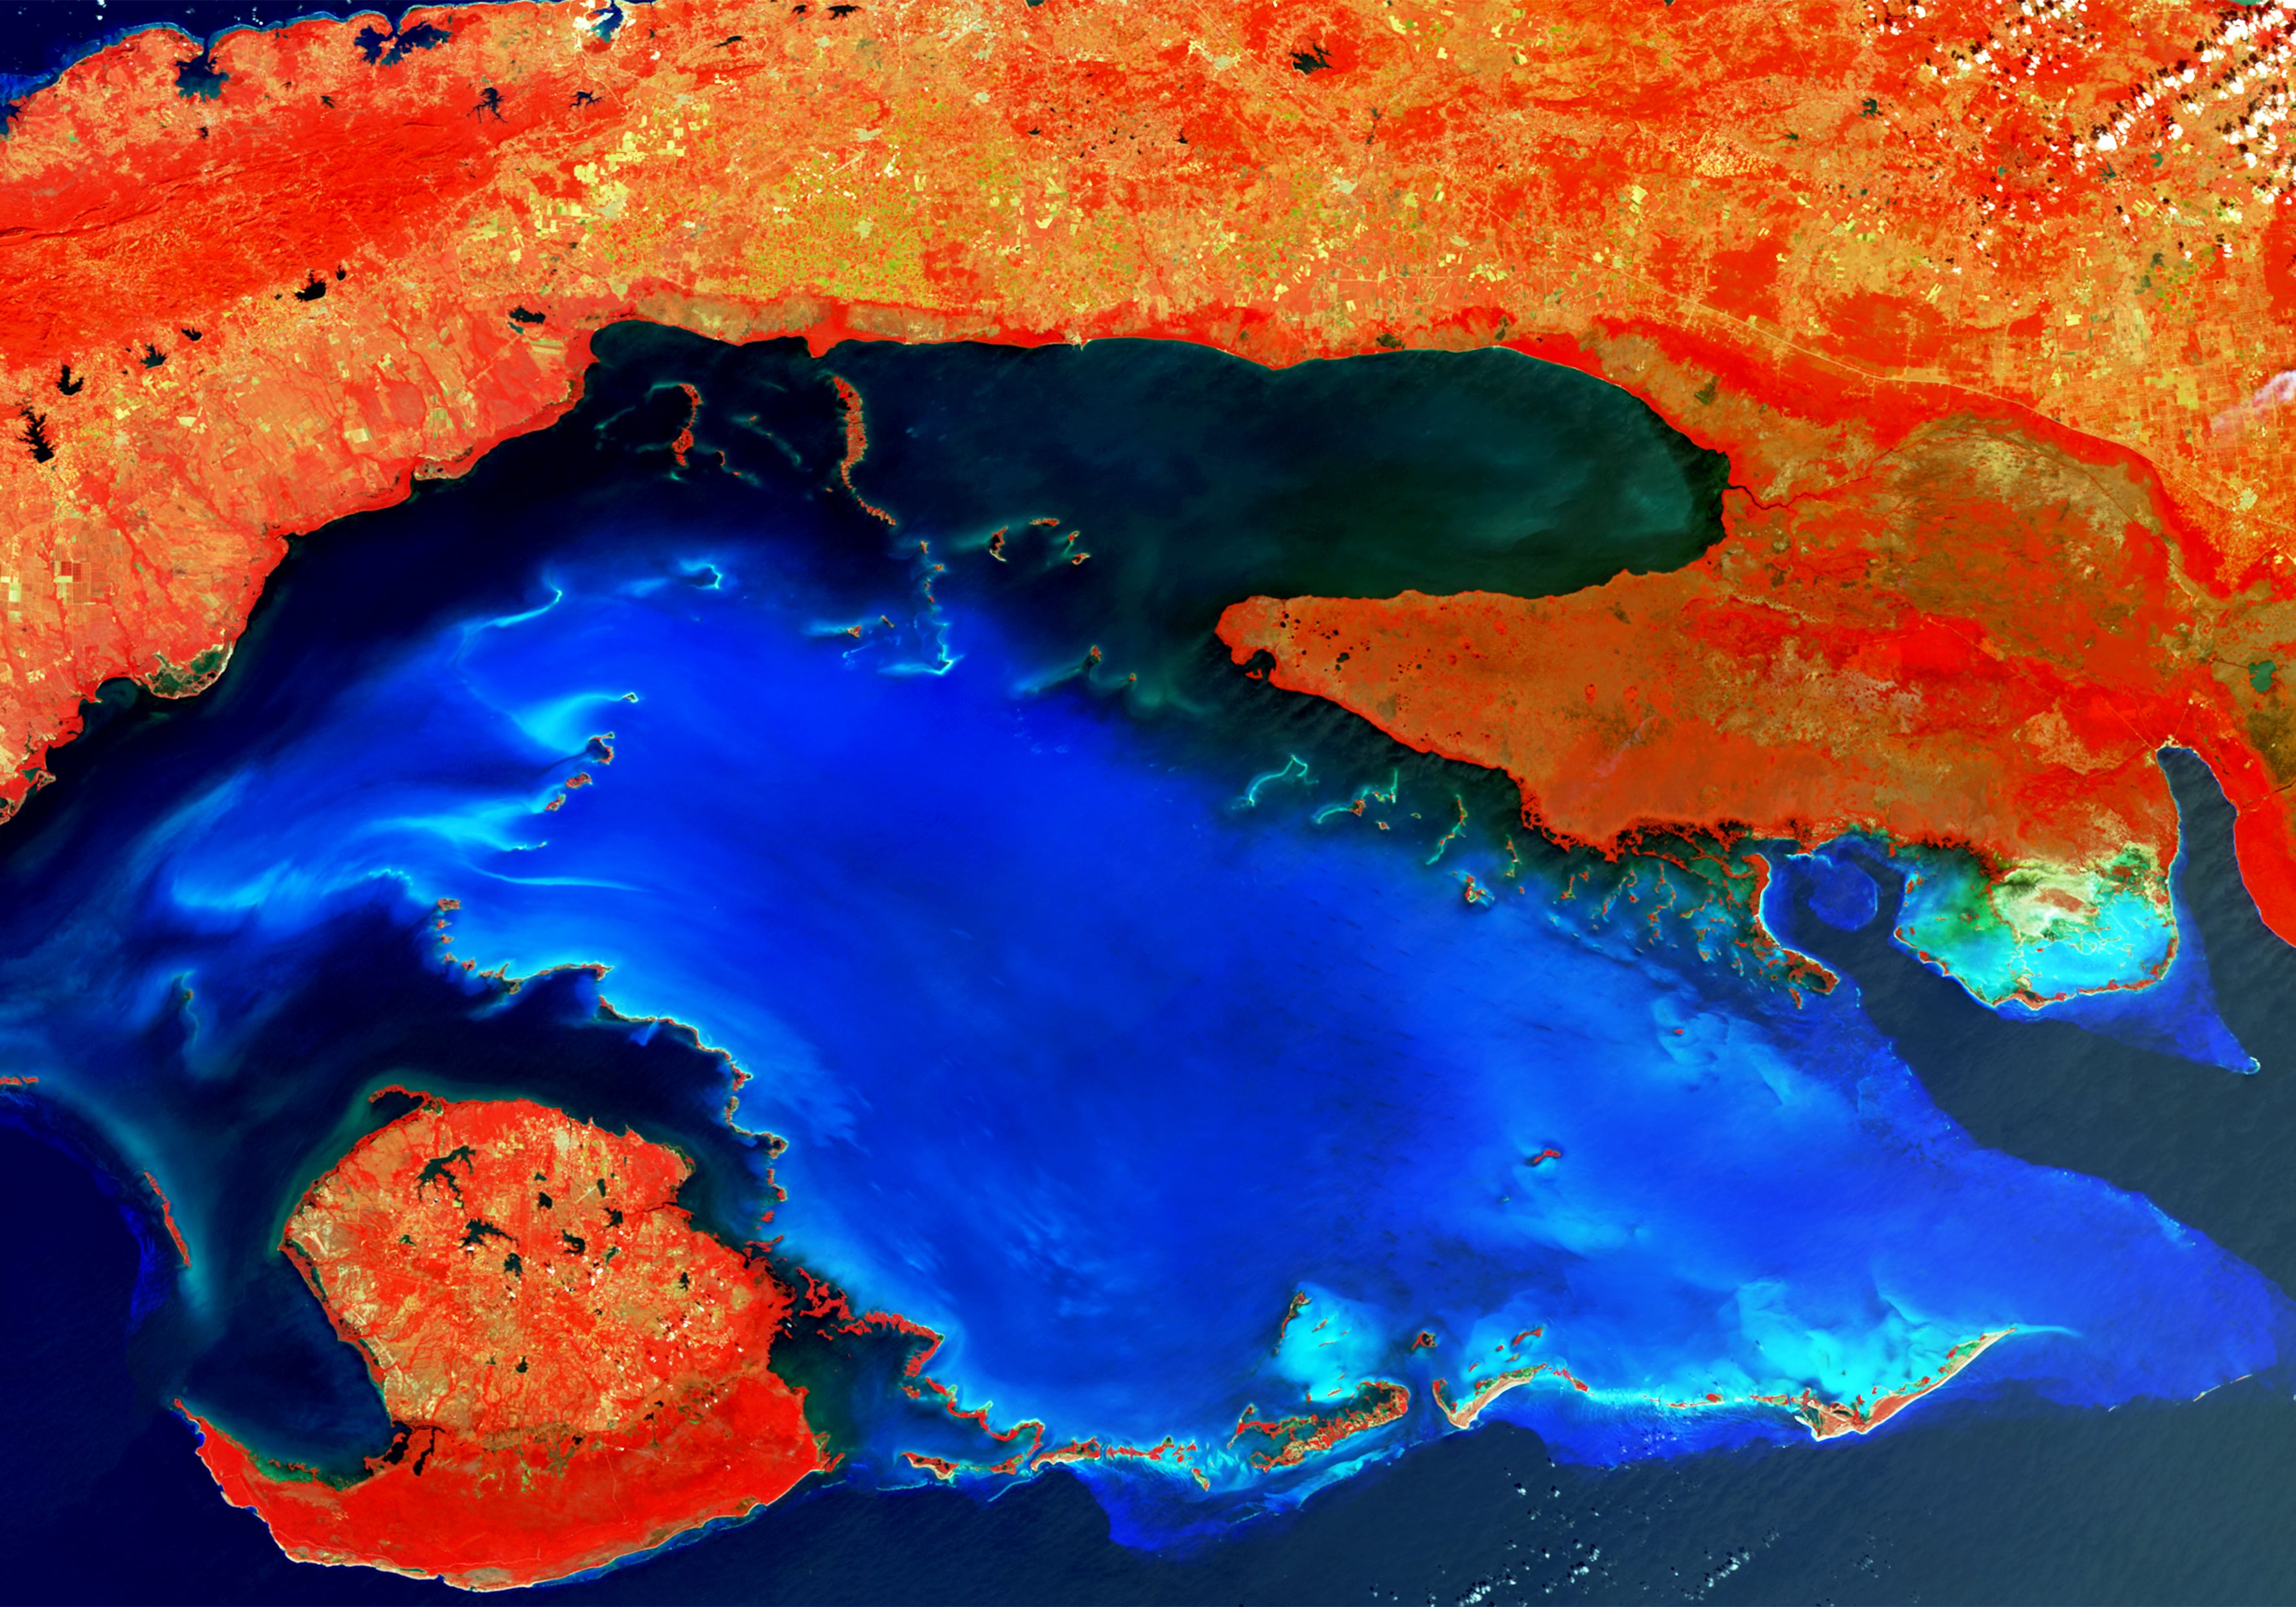  PROBA-V 100 m image of the Gulf of Batabanó, a shallow (61 m deep) straight or inlet between the main island of Cuba and the Canarreos archipelago in the south